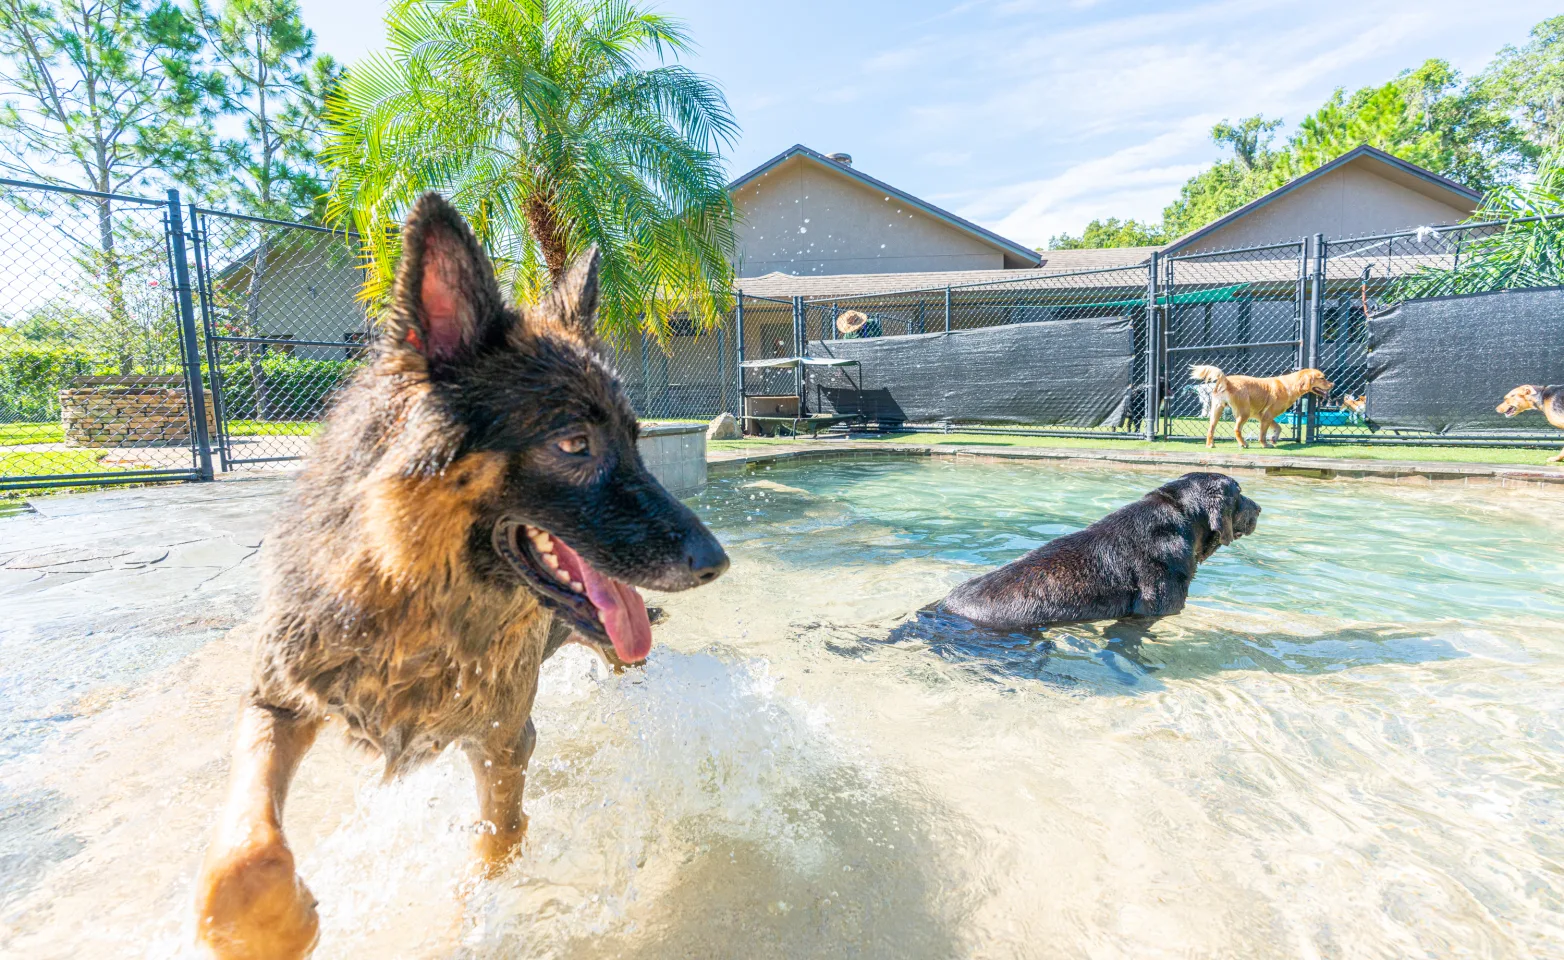 Dogs playing in a pool of water surrounded by a gate